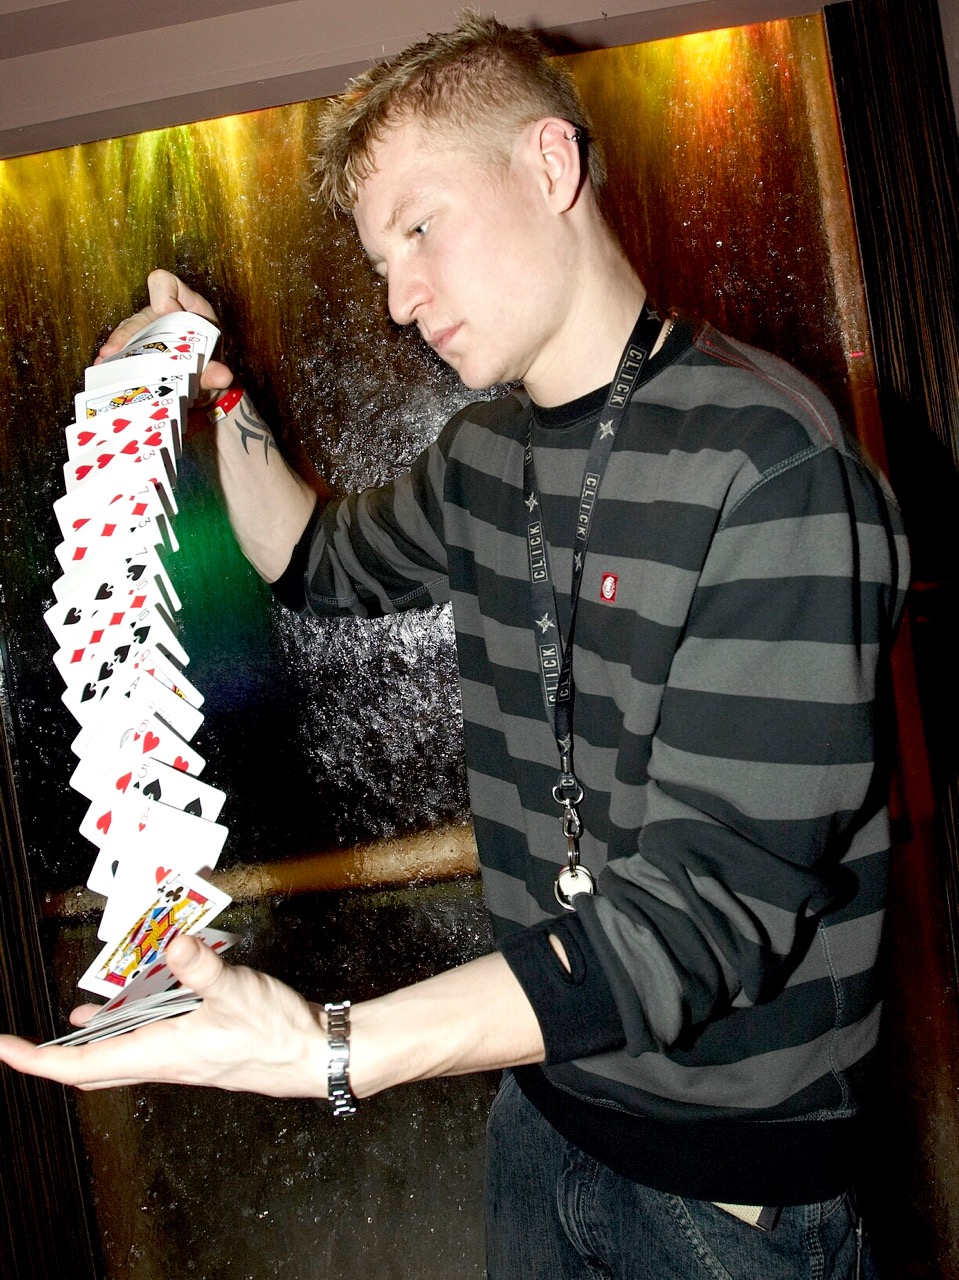 Street Magician Liam Walsh performing close up magic at MTV Party Funky Buddha Nightclub in London